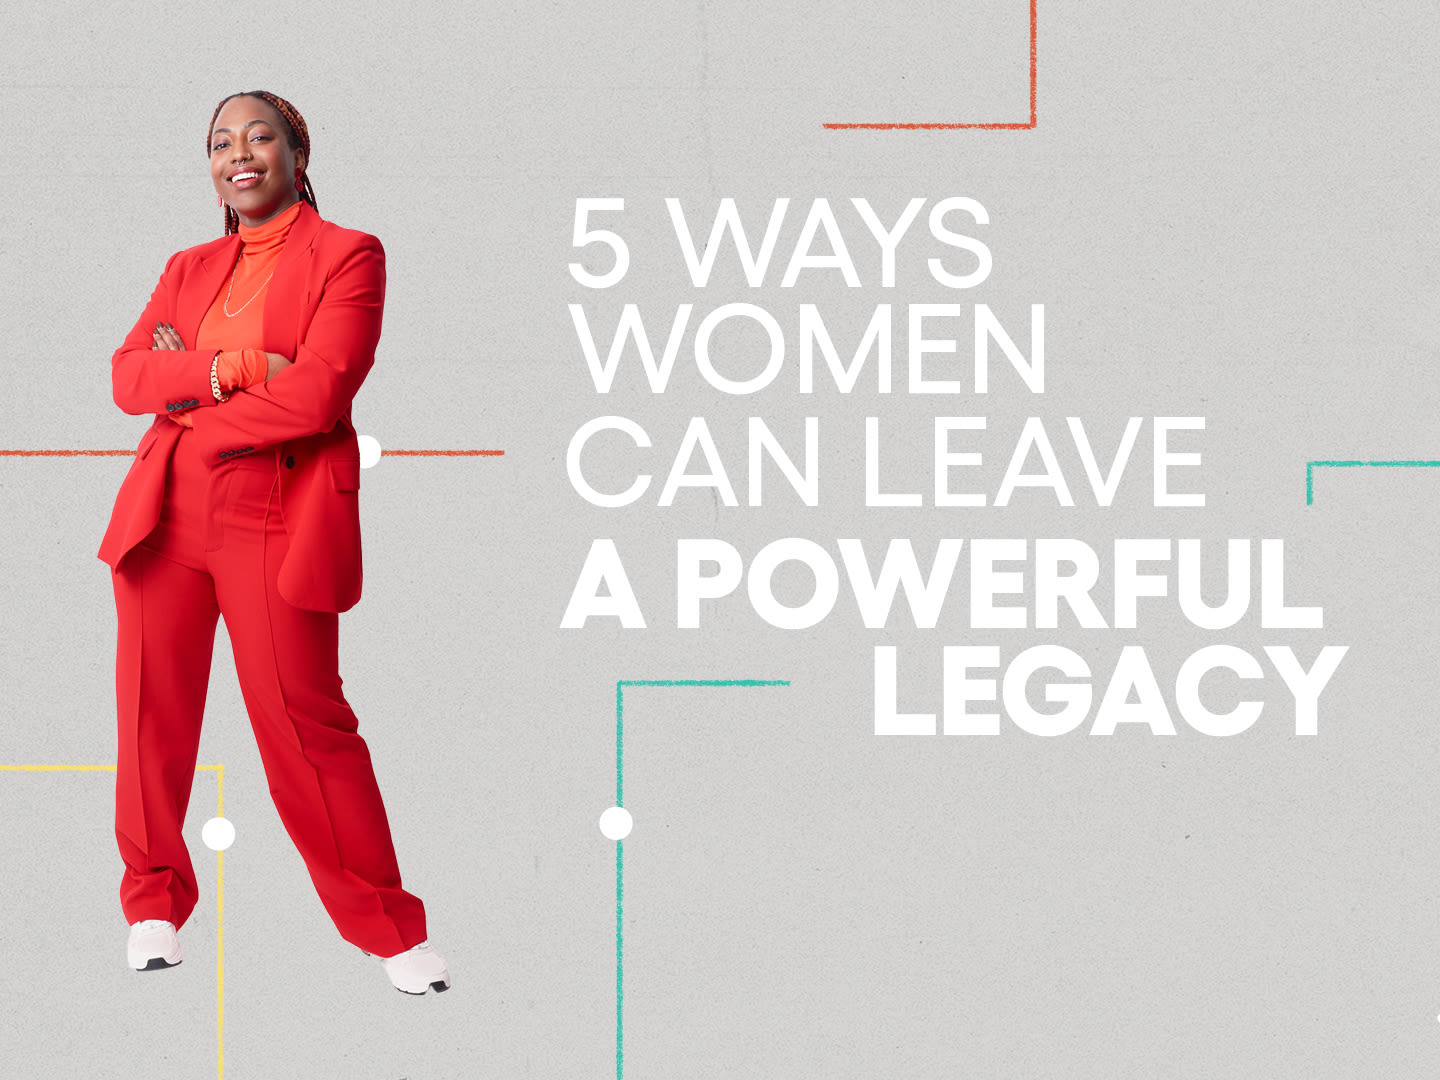 5 Ways Women Can Leave a Powerful Legacy